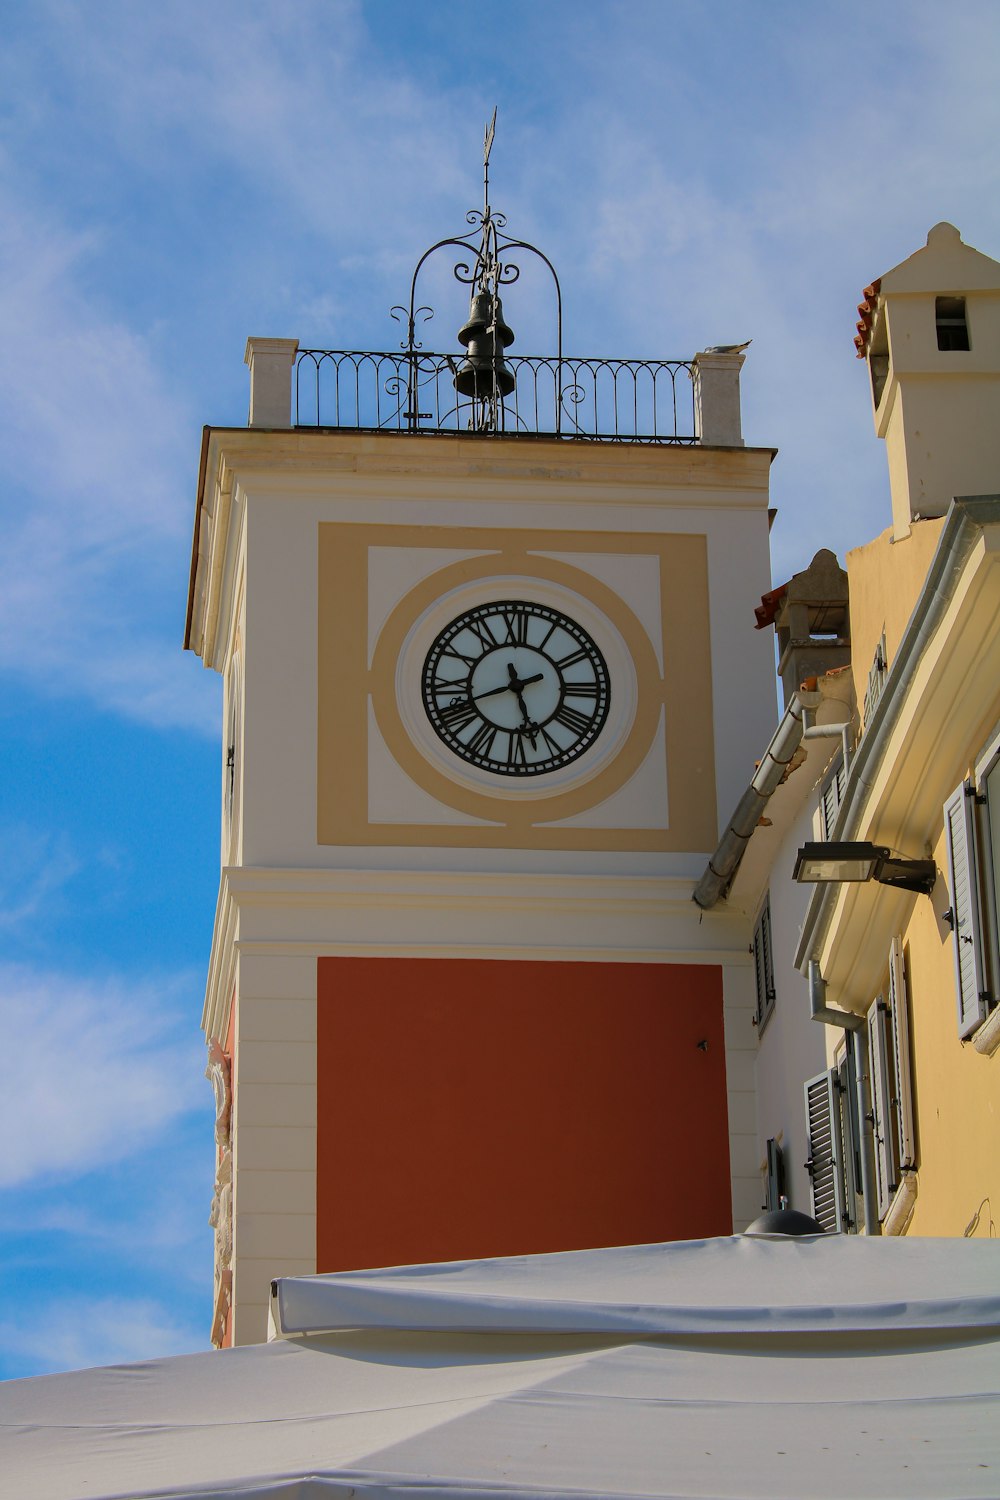 a clock tower with a weather vane on top of it